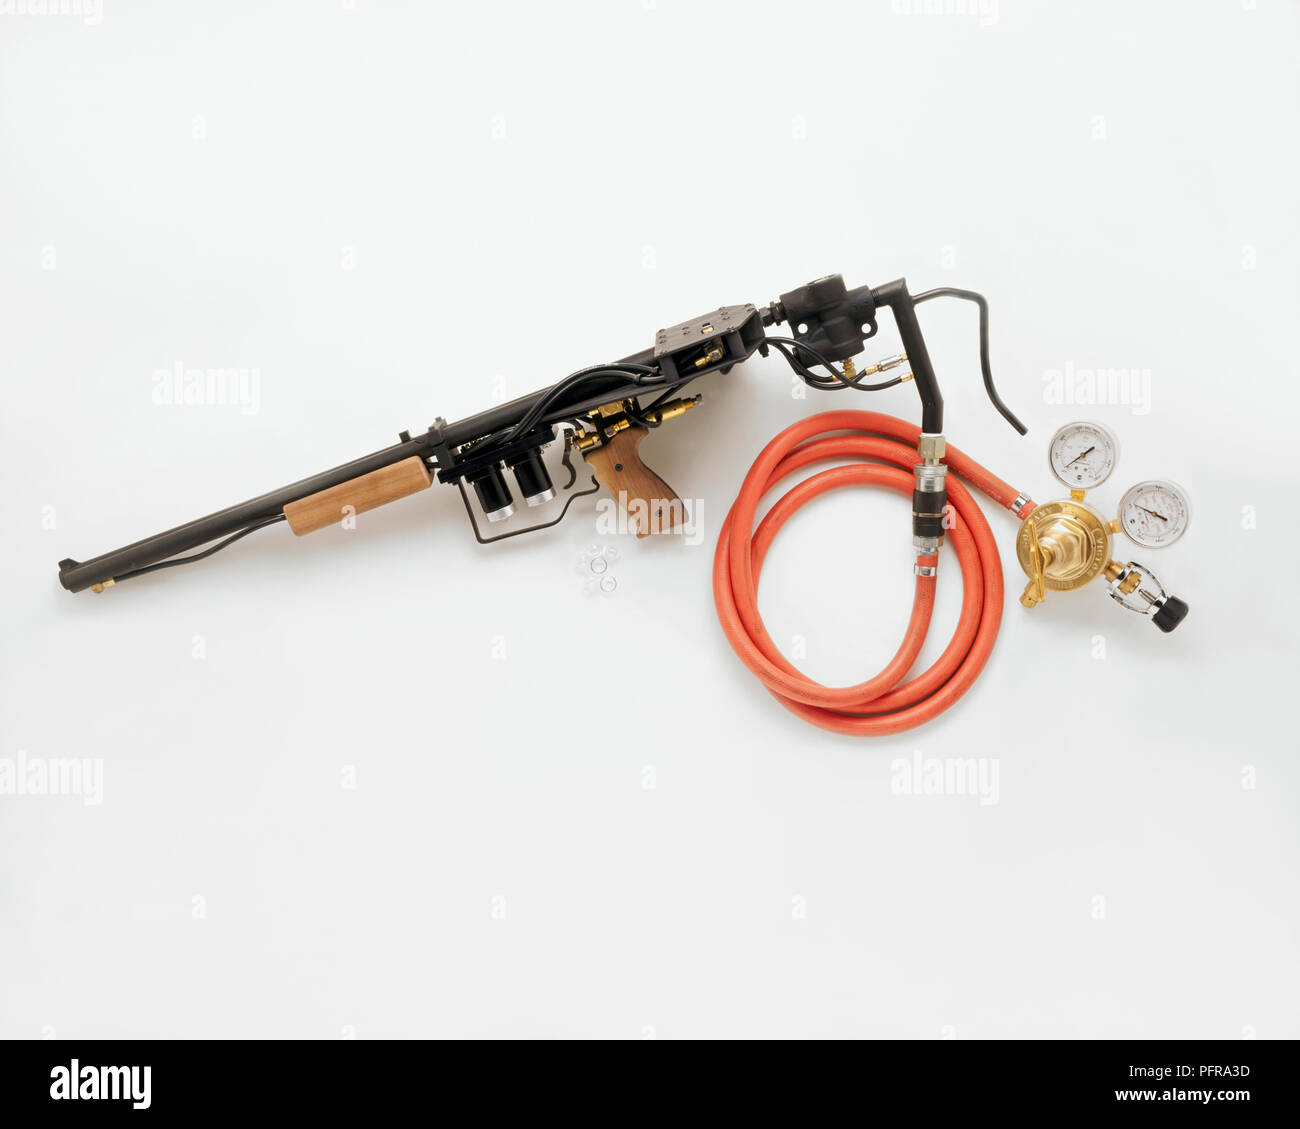 Special effects gun designed for use in film with hose and compressed air pump providing power for the trigger Stock Photo